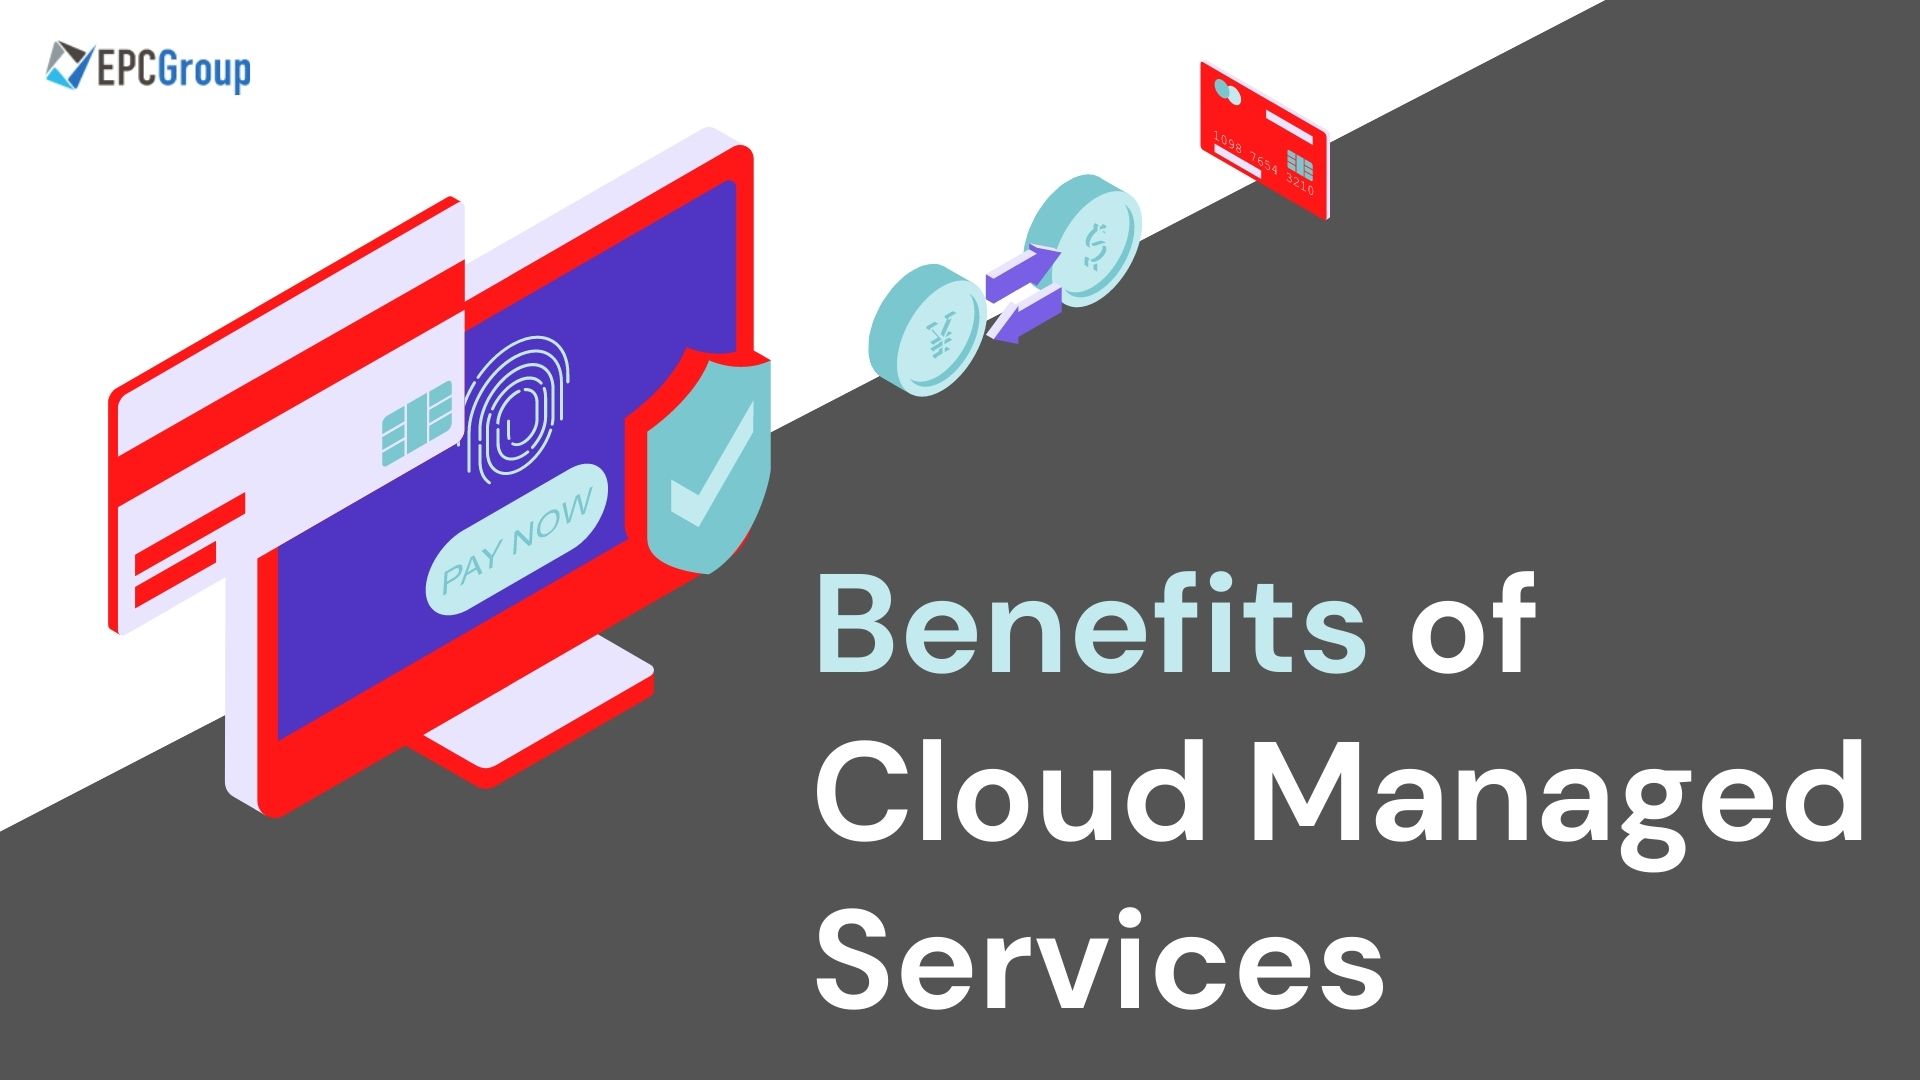 What Are The Benefits of Cloud Managed Services